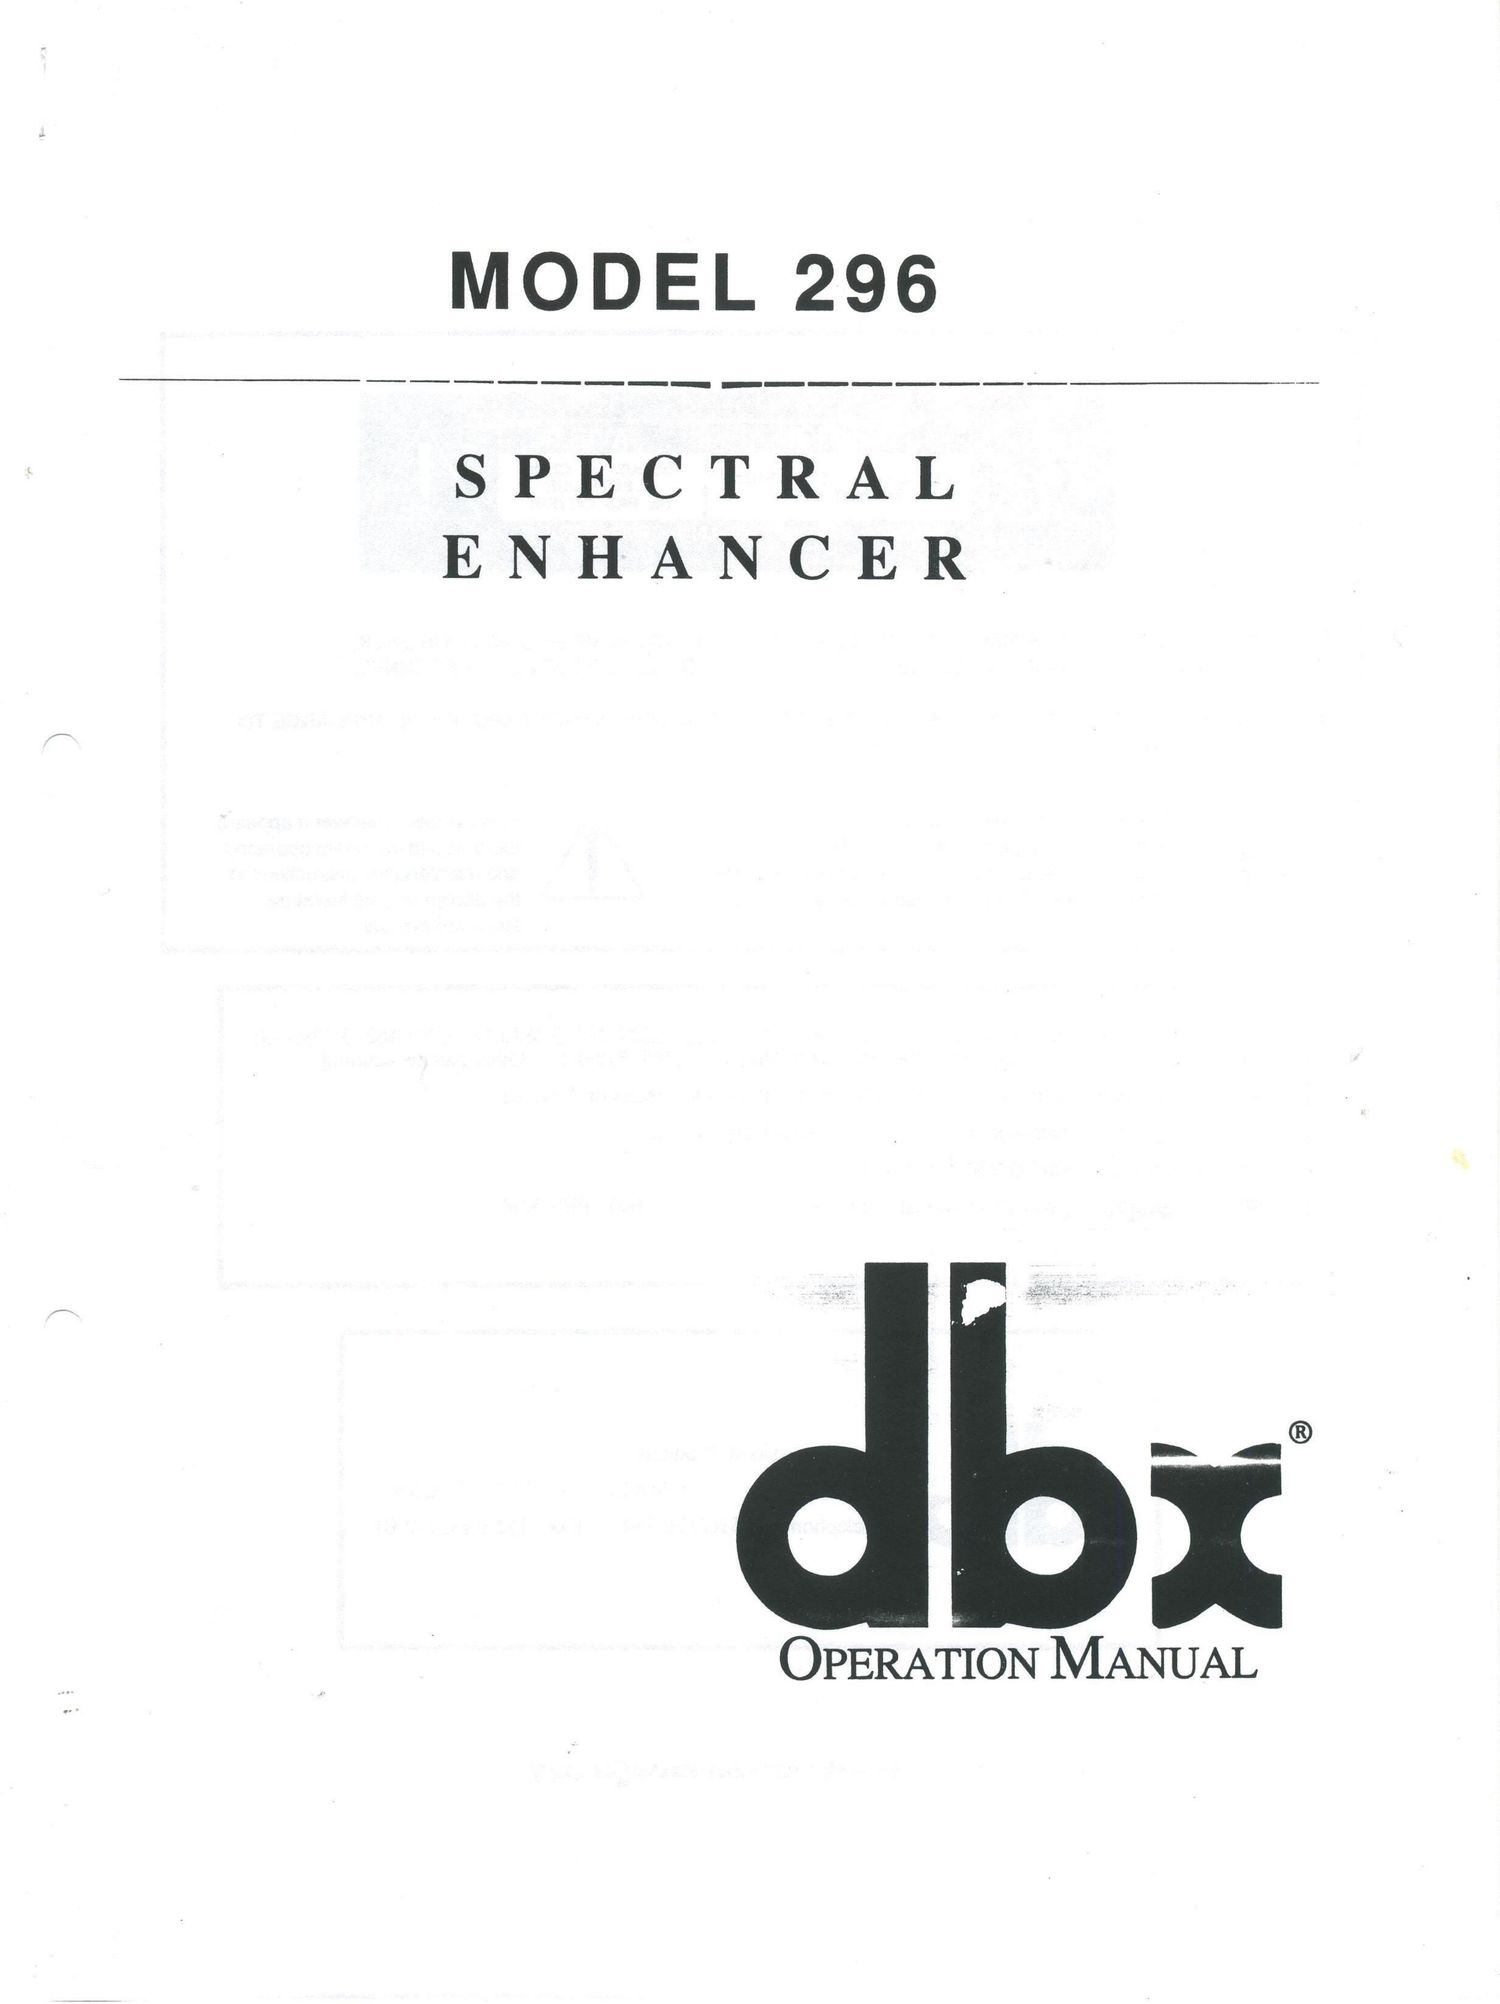 dbx 296 owners manual